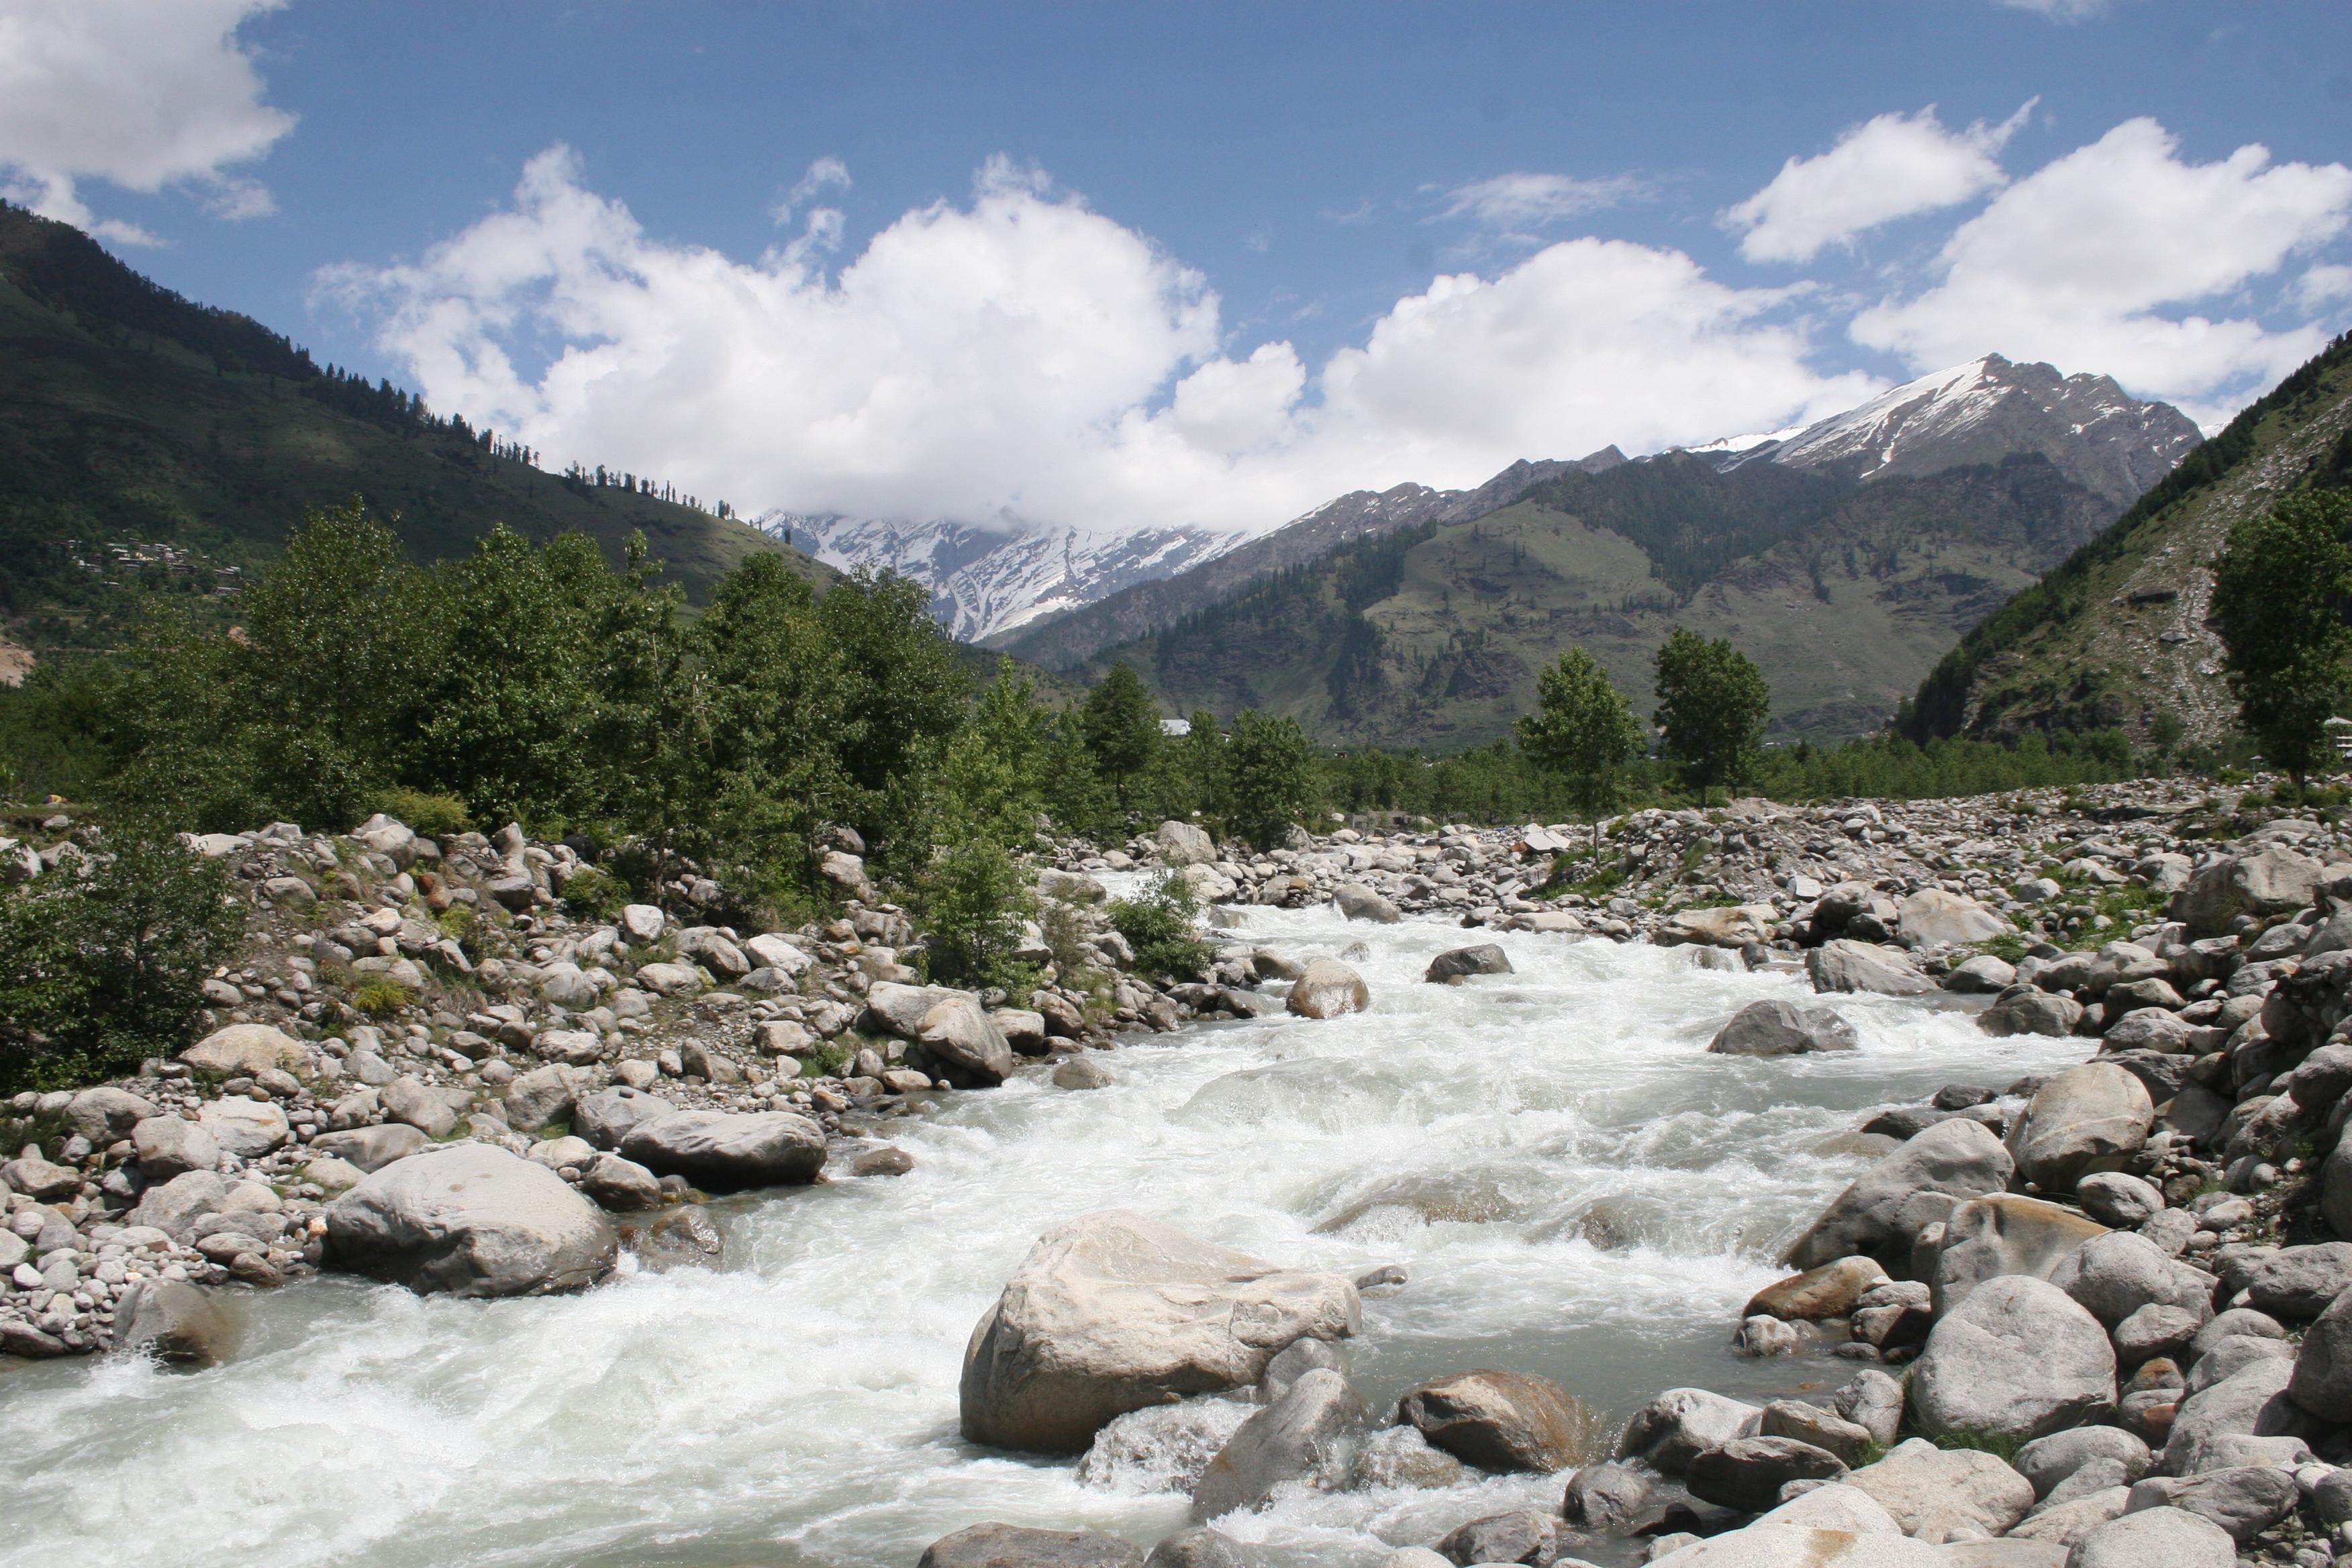 Manali Photos, Images for Manali, Kullu Pictures hd, Manali Winter Pics  Latest